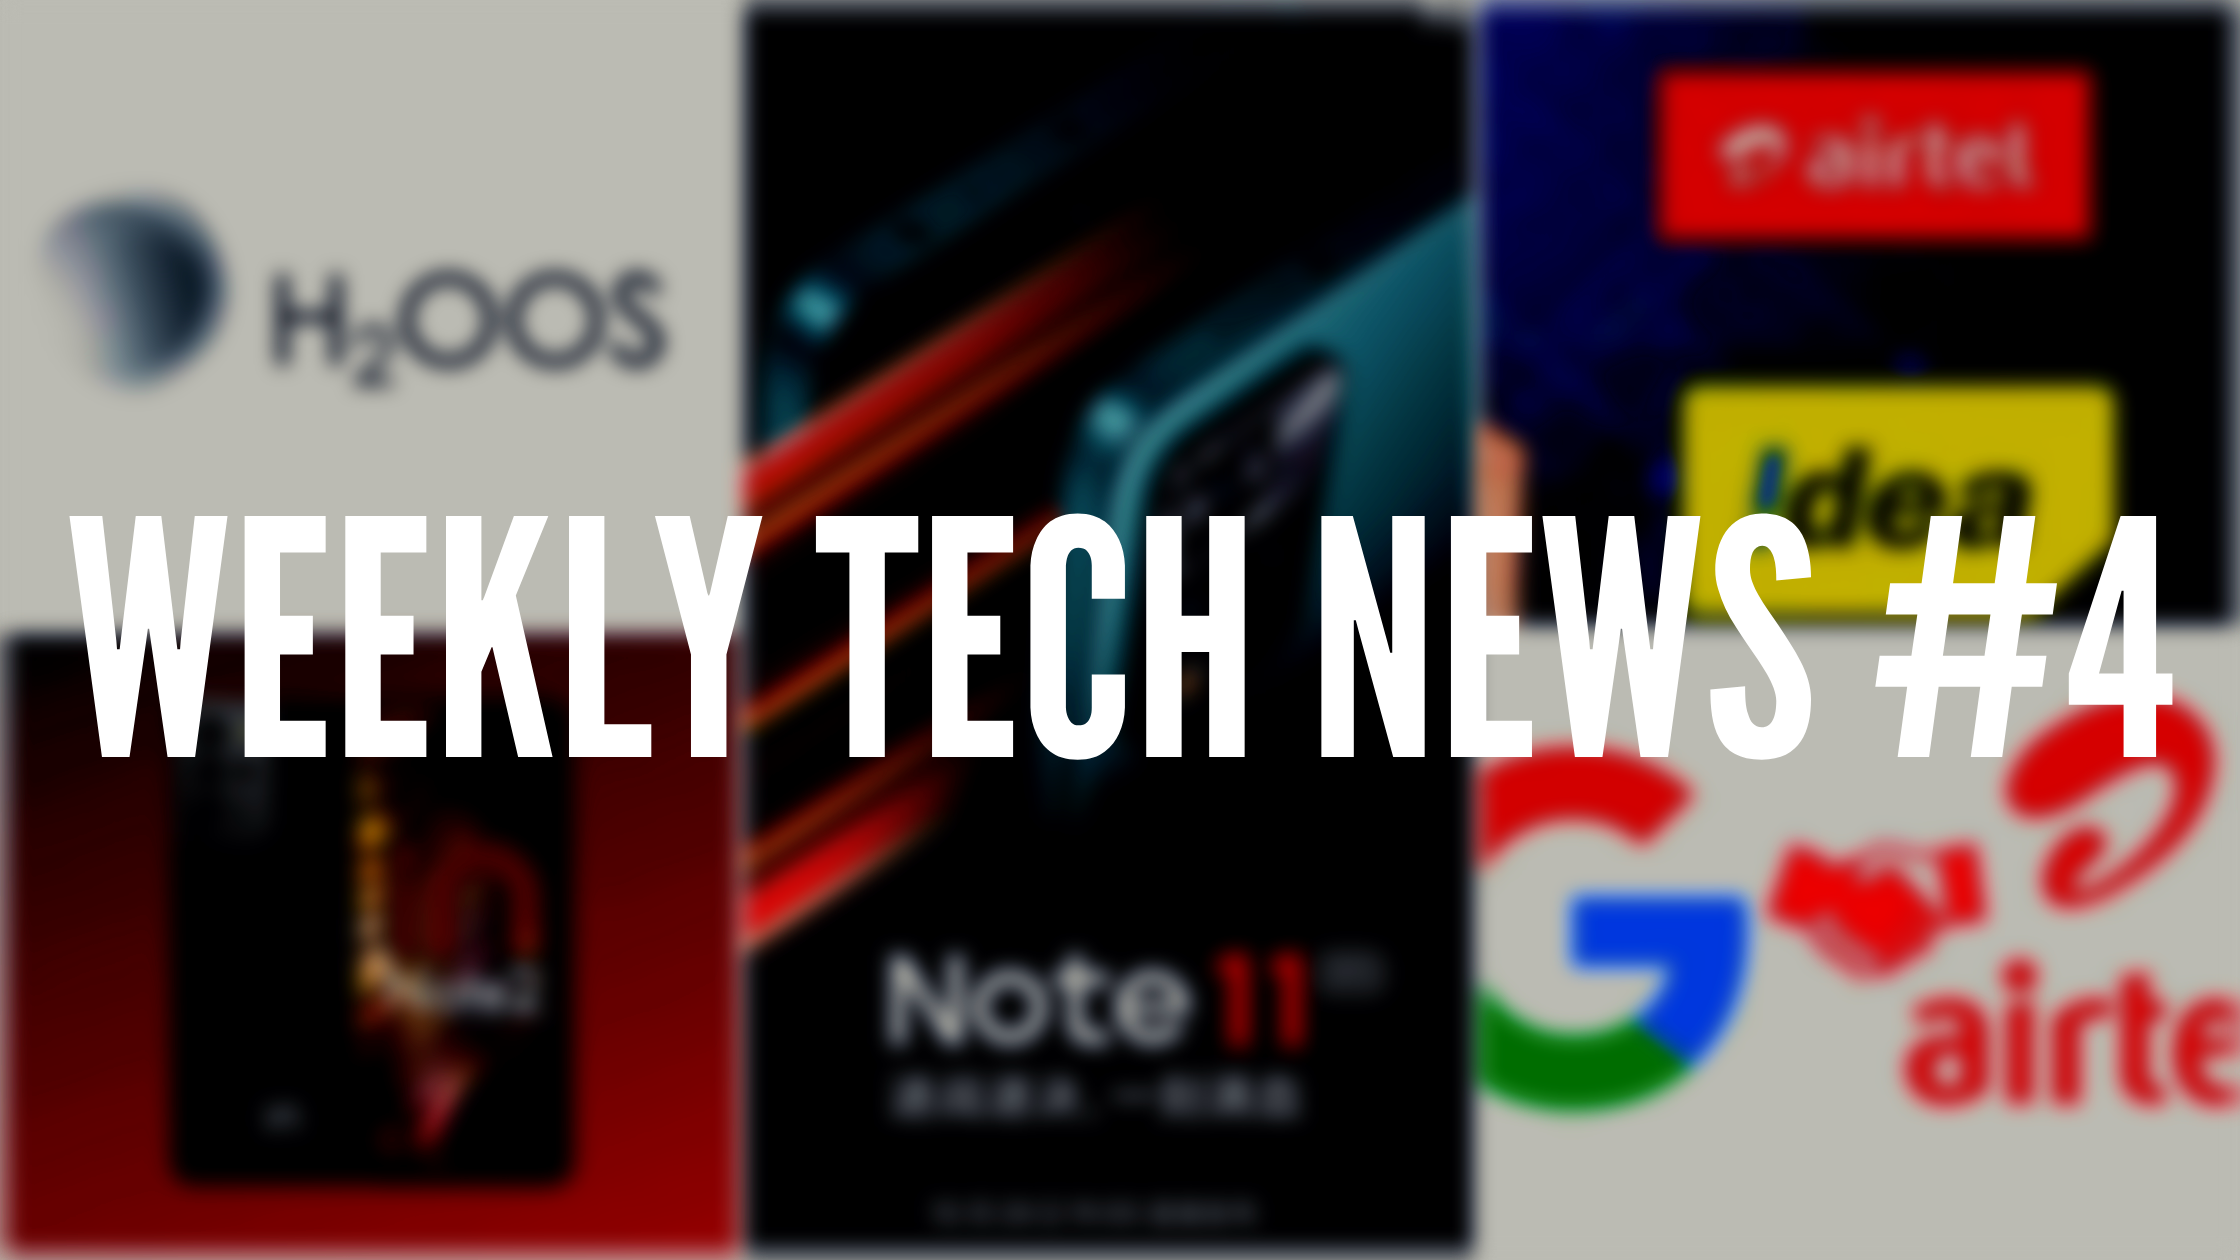 Weekly Tech News #4: H2OOS, Trai, Google investment.